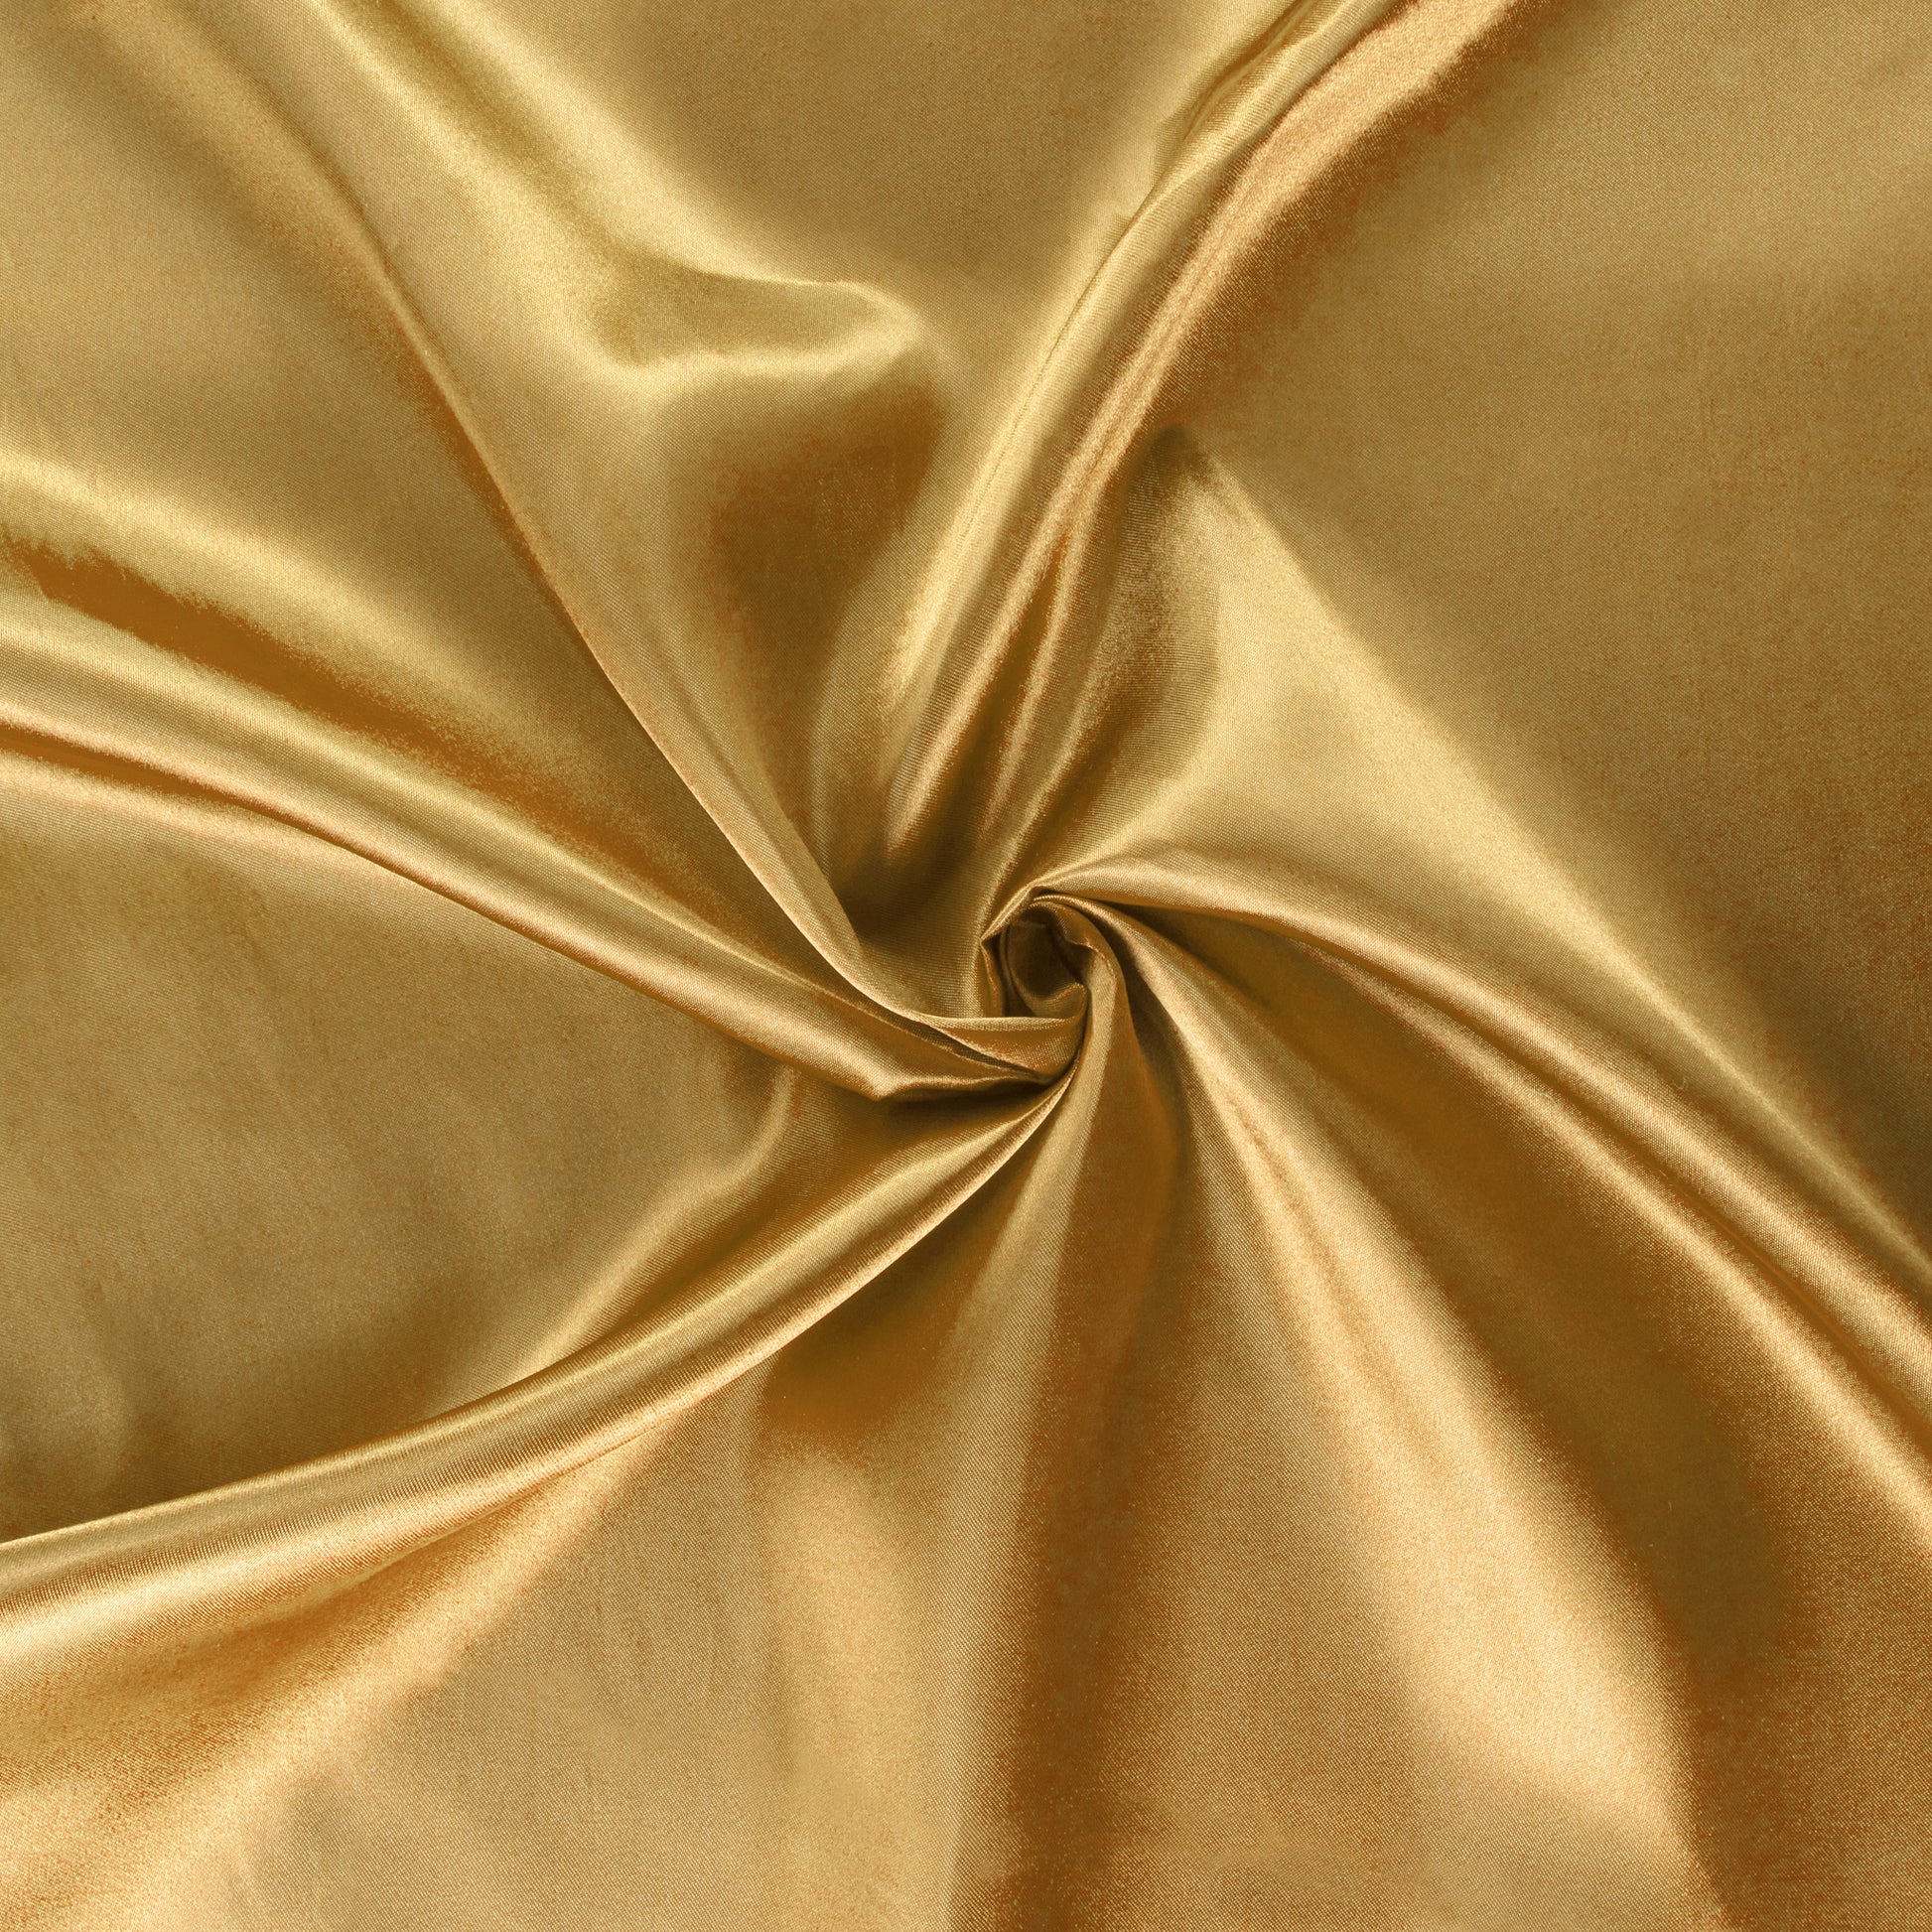 Cord Cover Antique Gold Satin 100 Lengths and Widths to Choose